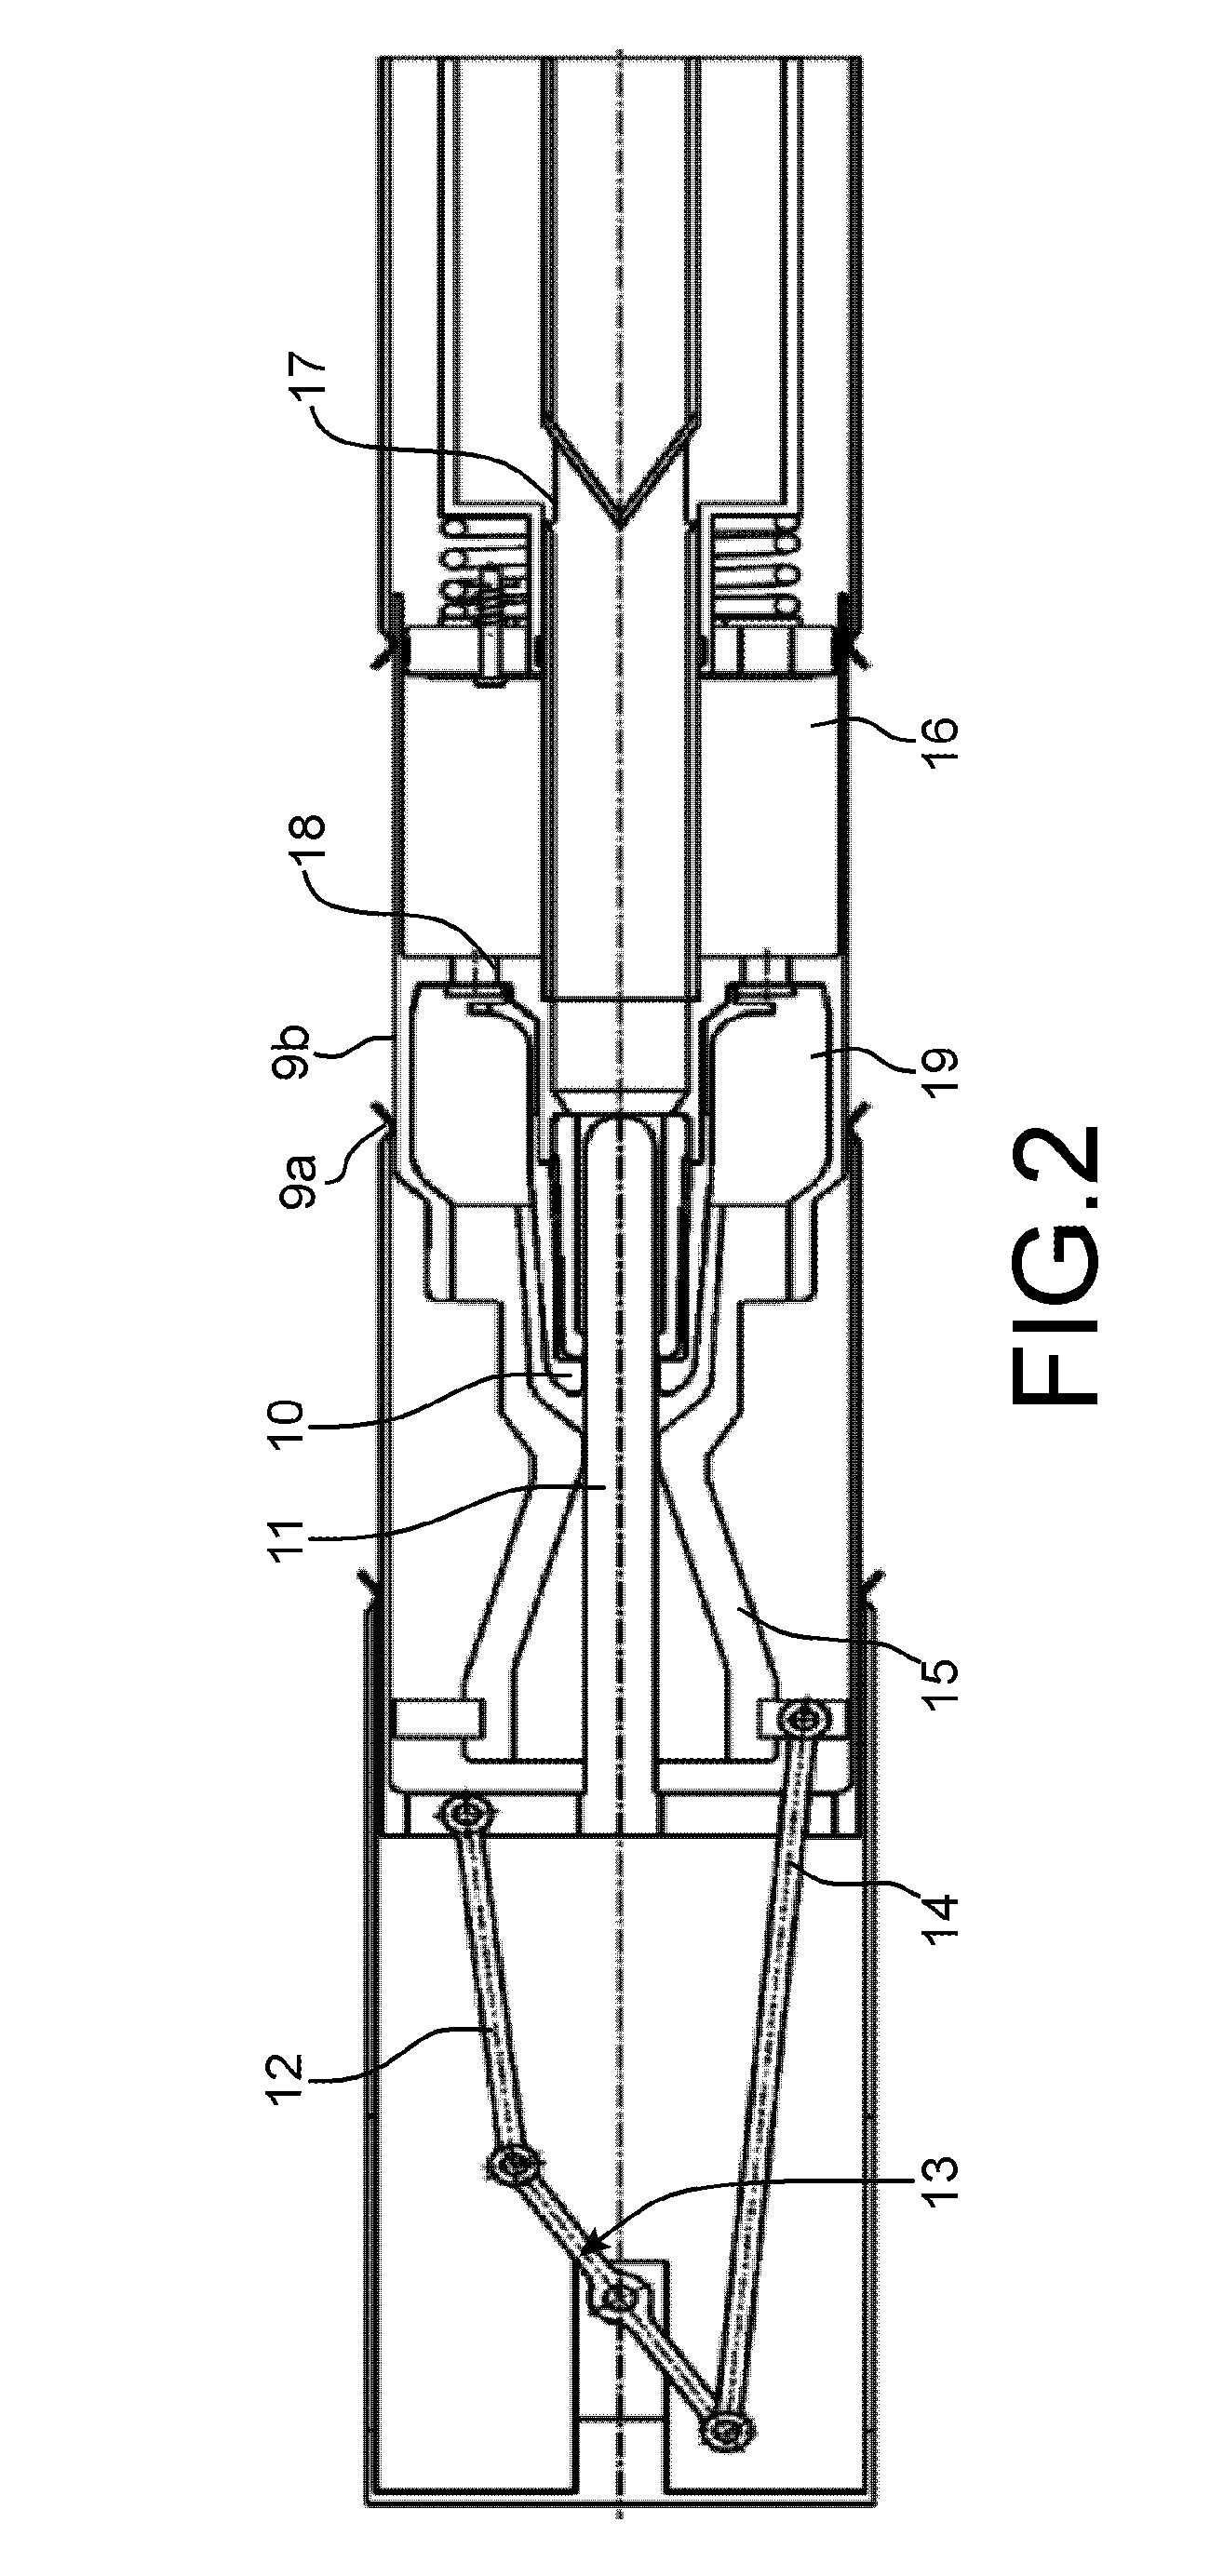 Gas-insulated medium or high-voltage electrical apparatus including carbon dioxide, oxygen, and heptafluoro-isobutyronitrile